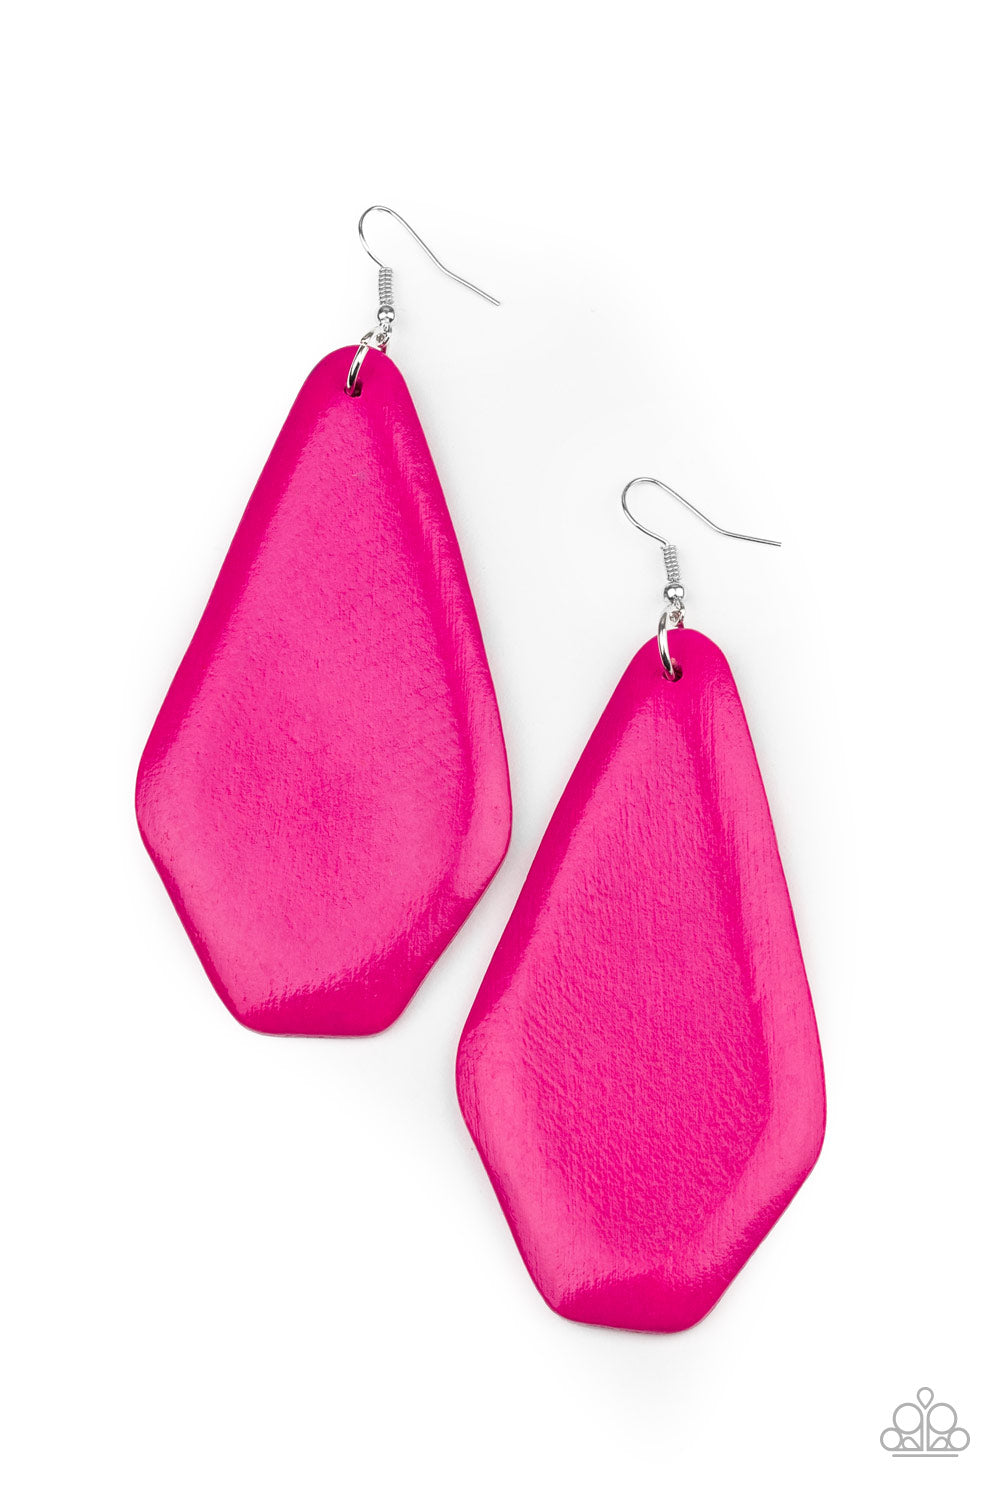 Paparazzi Accessories - Vacation Ready - Pink Earrings